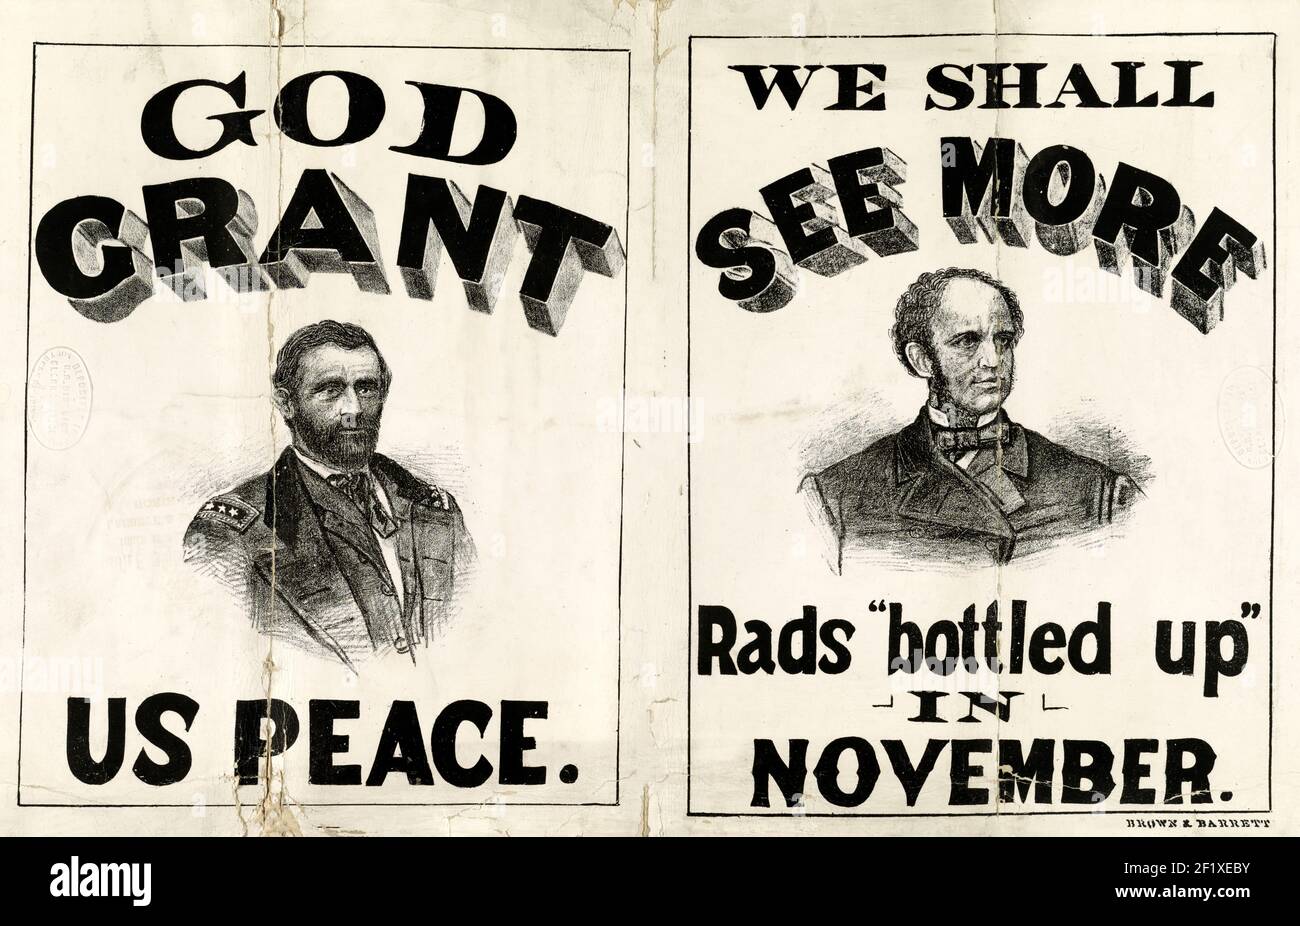 God grant us peace We shall see more Rads 'bottled up' in November. Print shows a double campaign placard or sign. The work may be an uncut proof for two placards, produced for both Republican and Democratic camps during the 1868 campaign. It is unclear whether the Grant image is intended to be serious or facetious. The Grant panel has a bust-length portrait of the Republican candidate with the words, 'God Grant US Peace.' Grant closed his speech accepting the 1868 nomination with the words 'Let us have peace,' which later became his campaign slogan. The panel at right has a portrait of Grant' Stock Photo